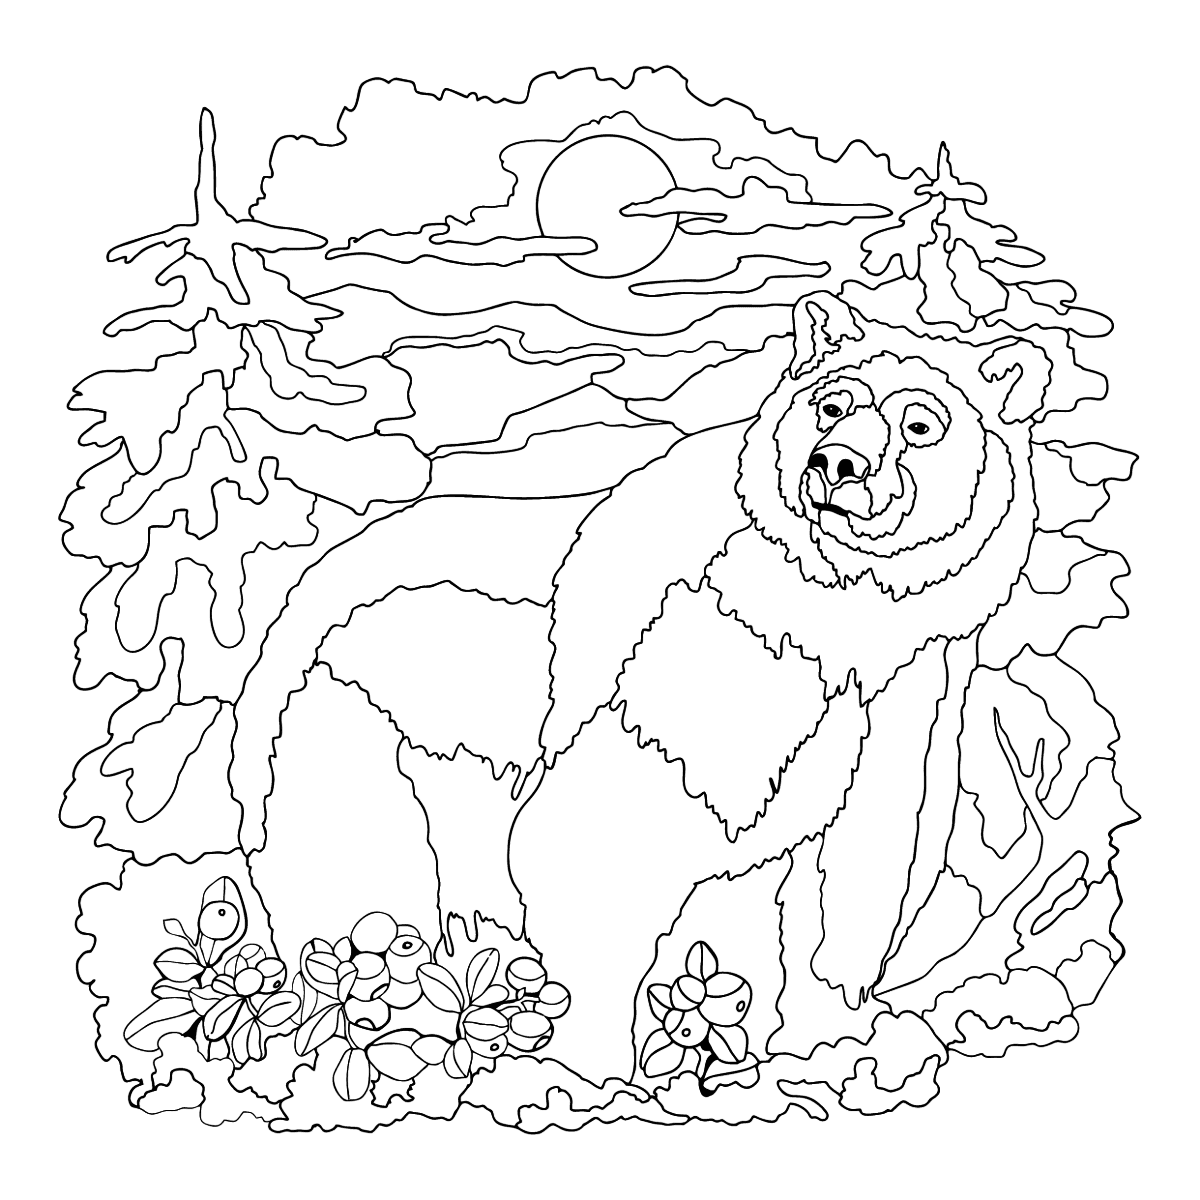 https://coloring-for-adults.com/coloring-pages/bears/bear-in-forest-coloring-page.png